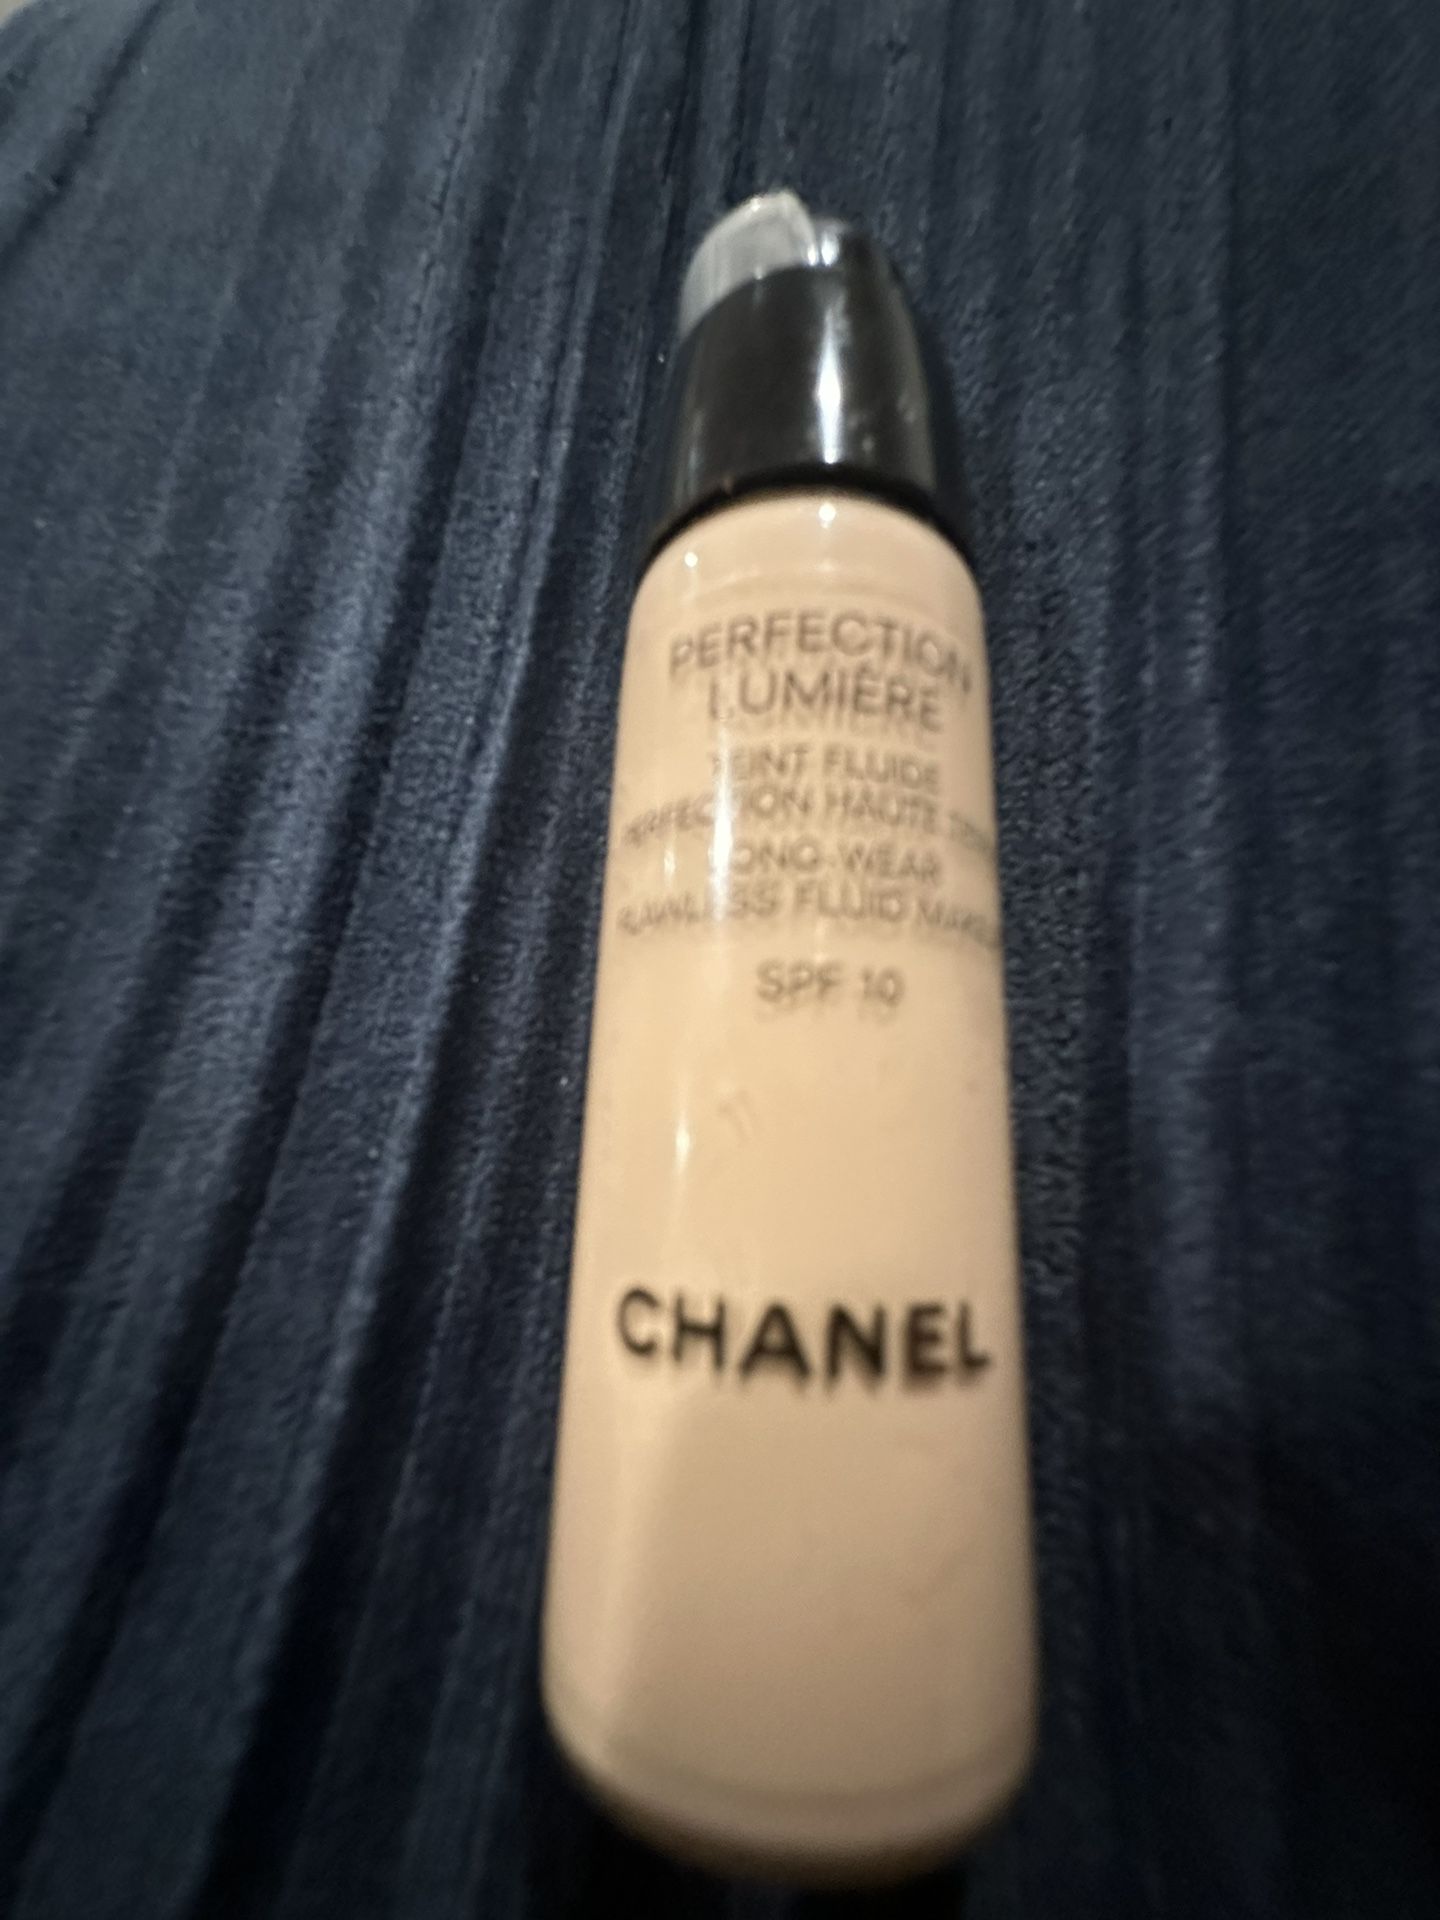 Chanel Perfection Lumiere Make-up